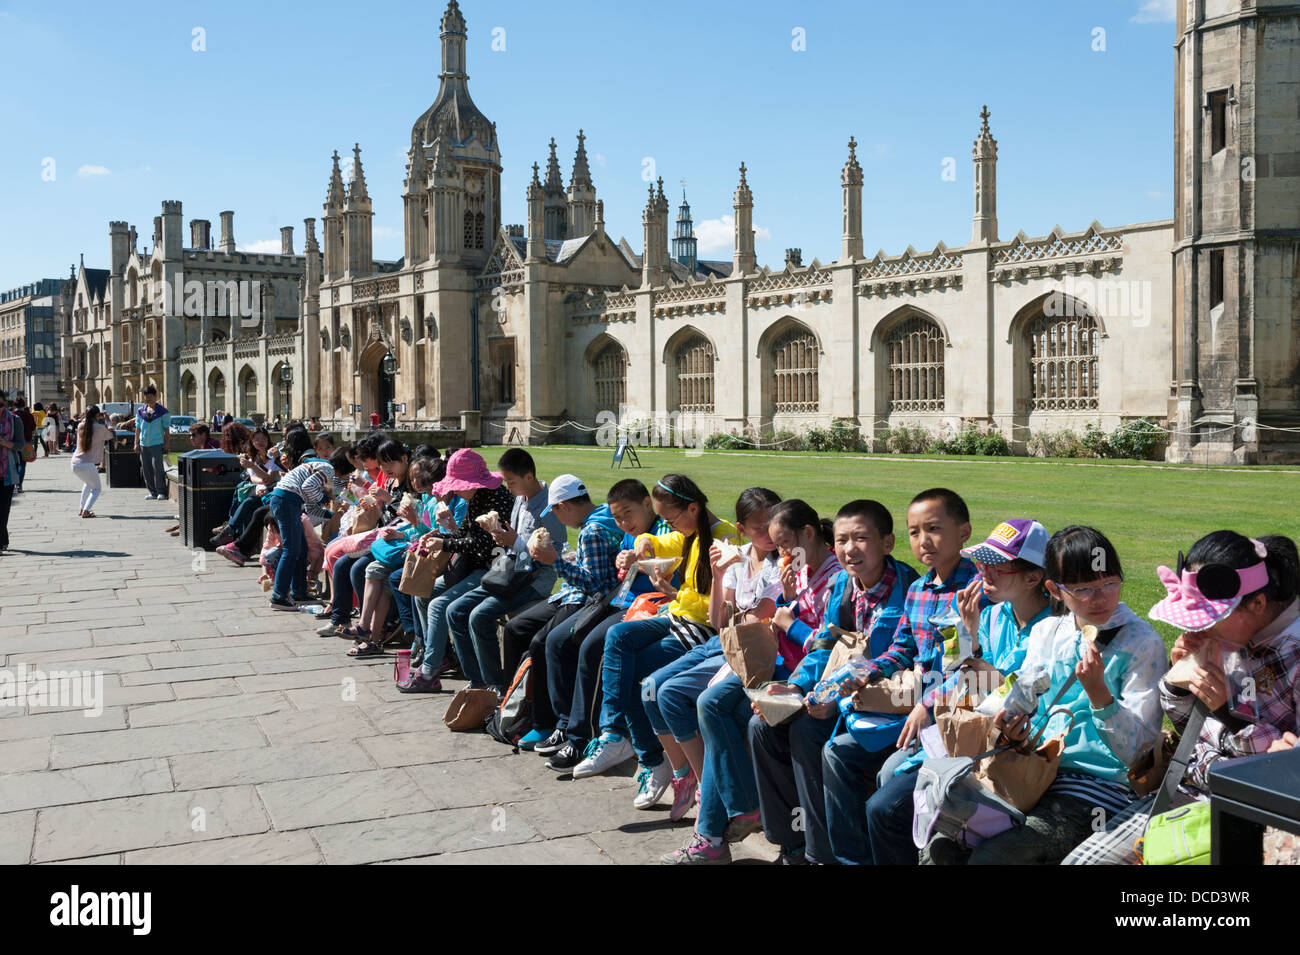 Young chinese children tourists lined up on a wall outside King's College Cambridge UK having lunch or picnic Stock Photo